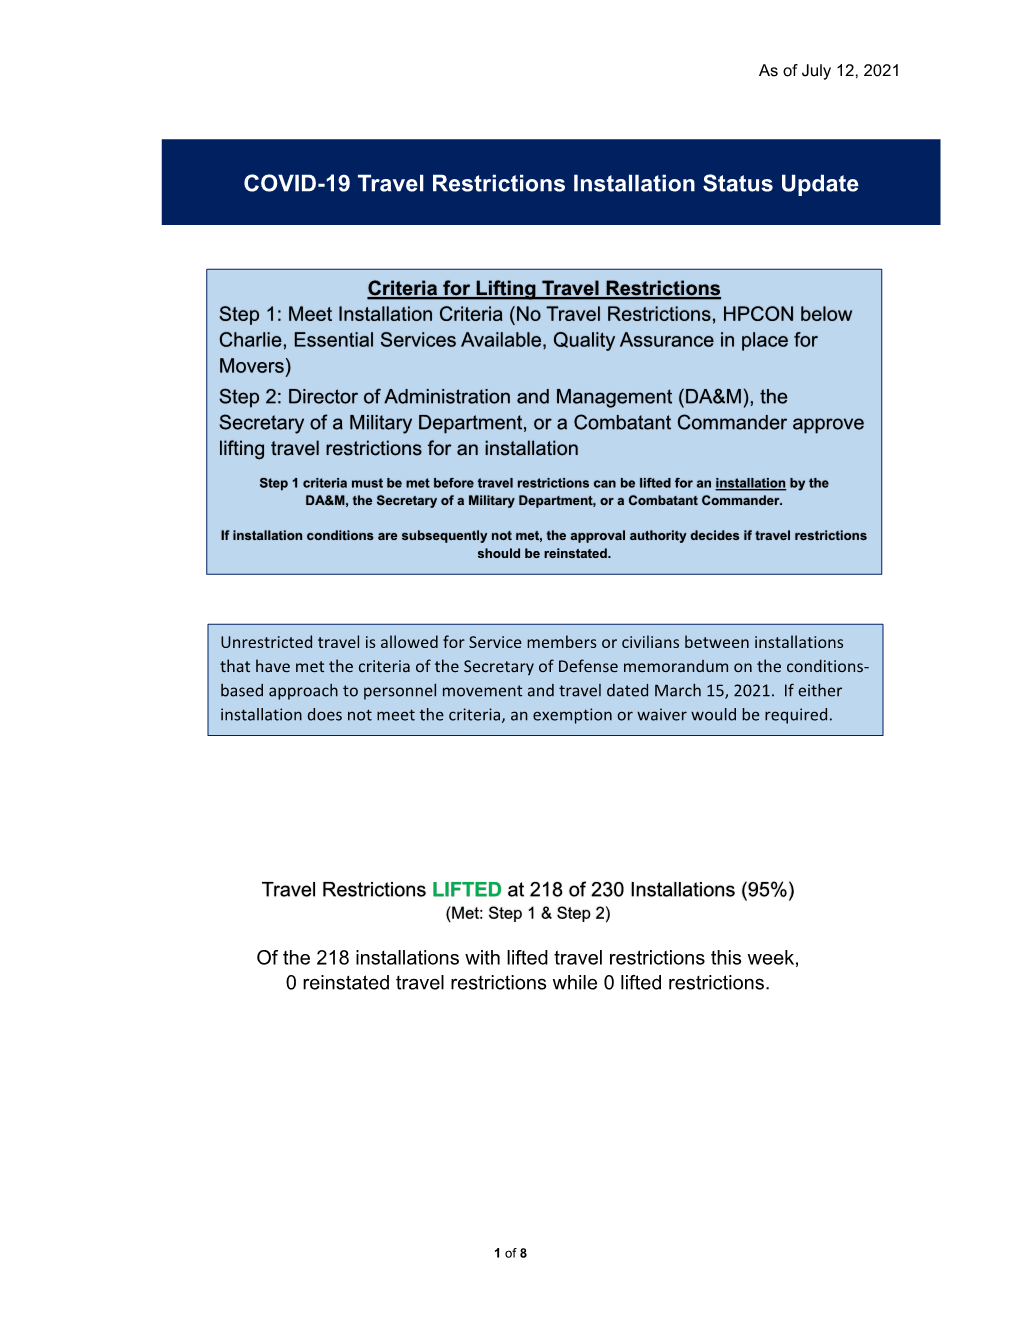 COVID-19 Travel Restrictions Installation Status Update, July 14